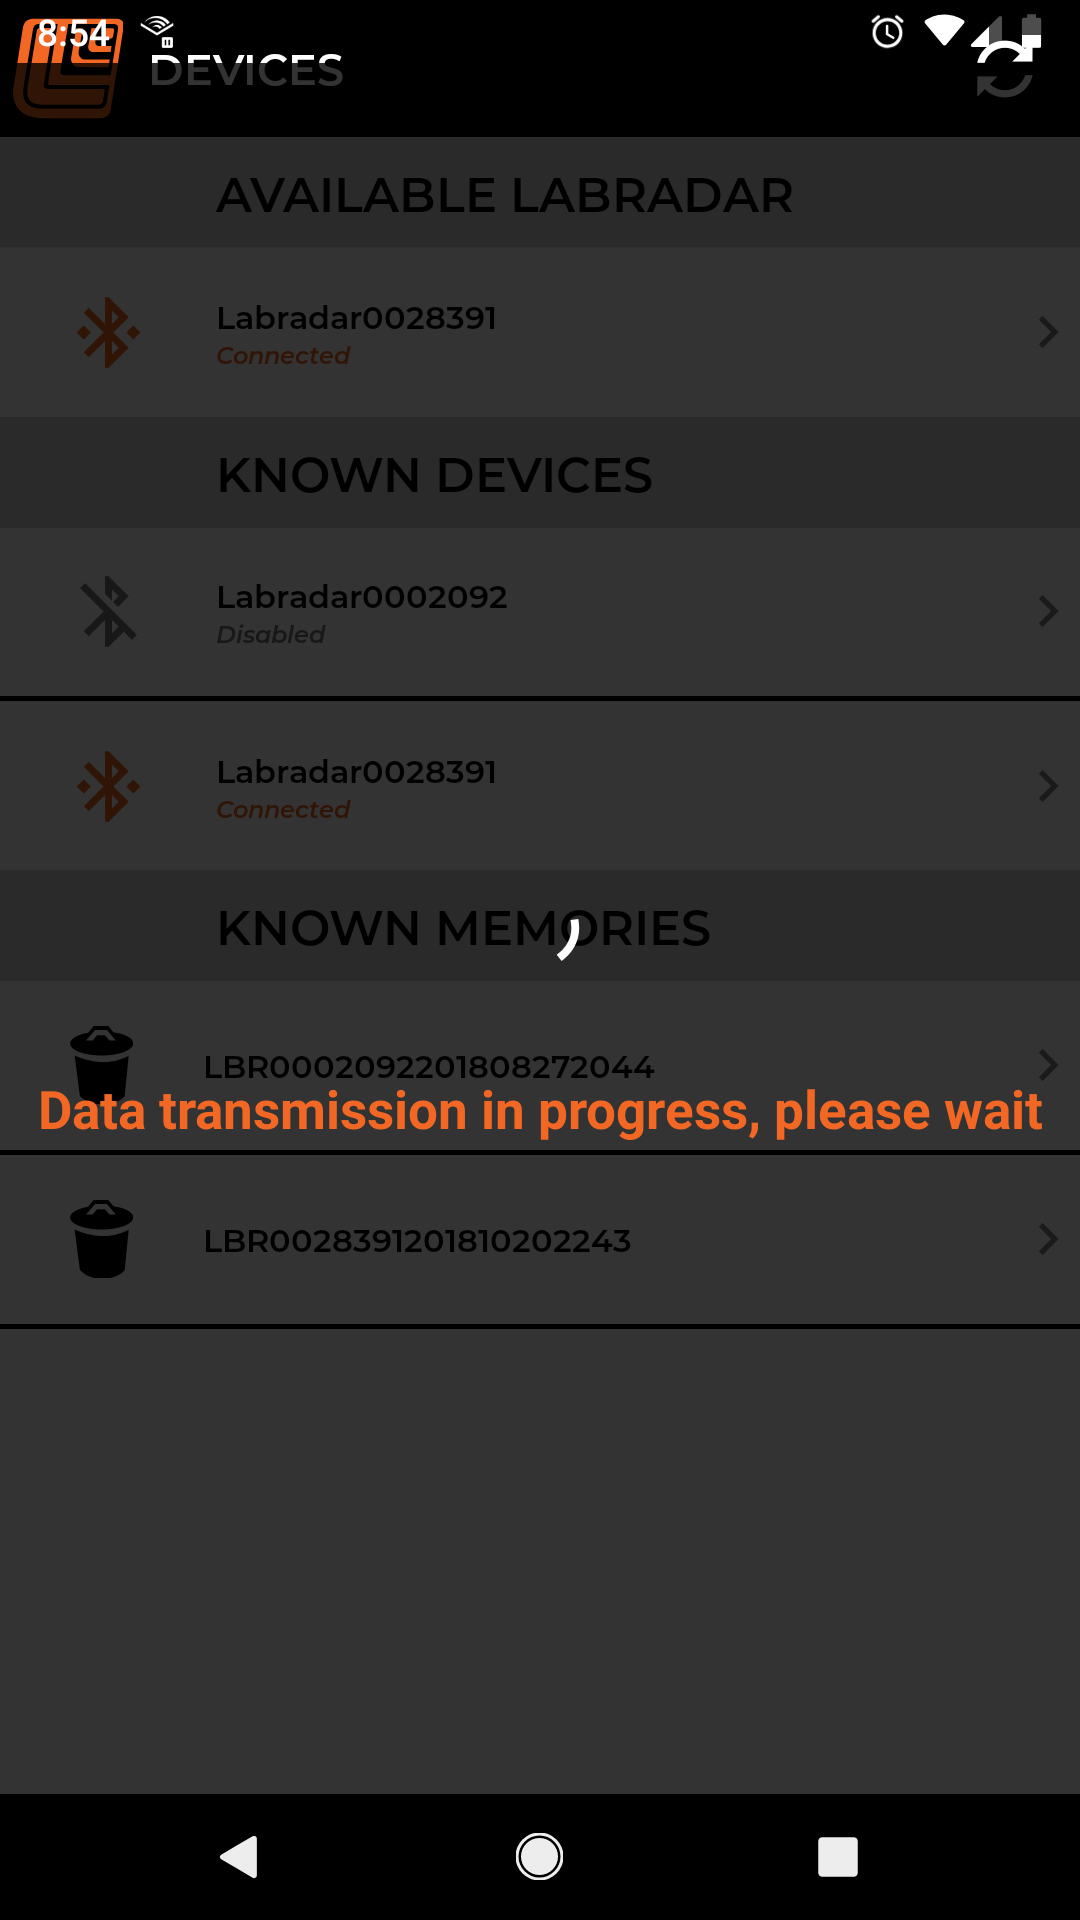 Waiting for the LabRadar to transfer data over Bluetooth